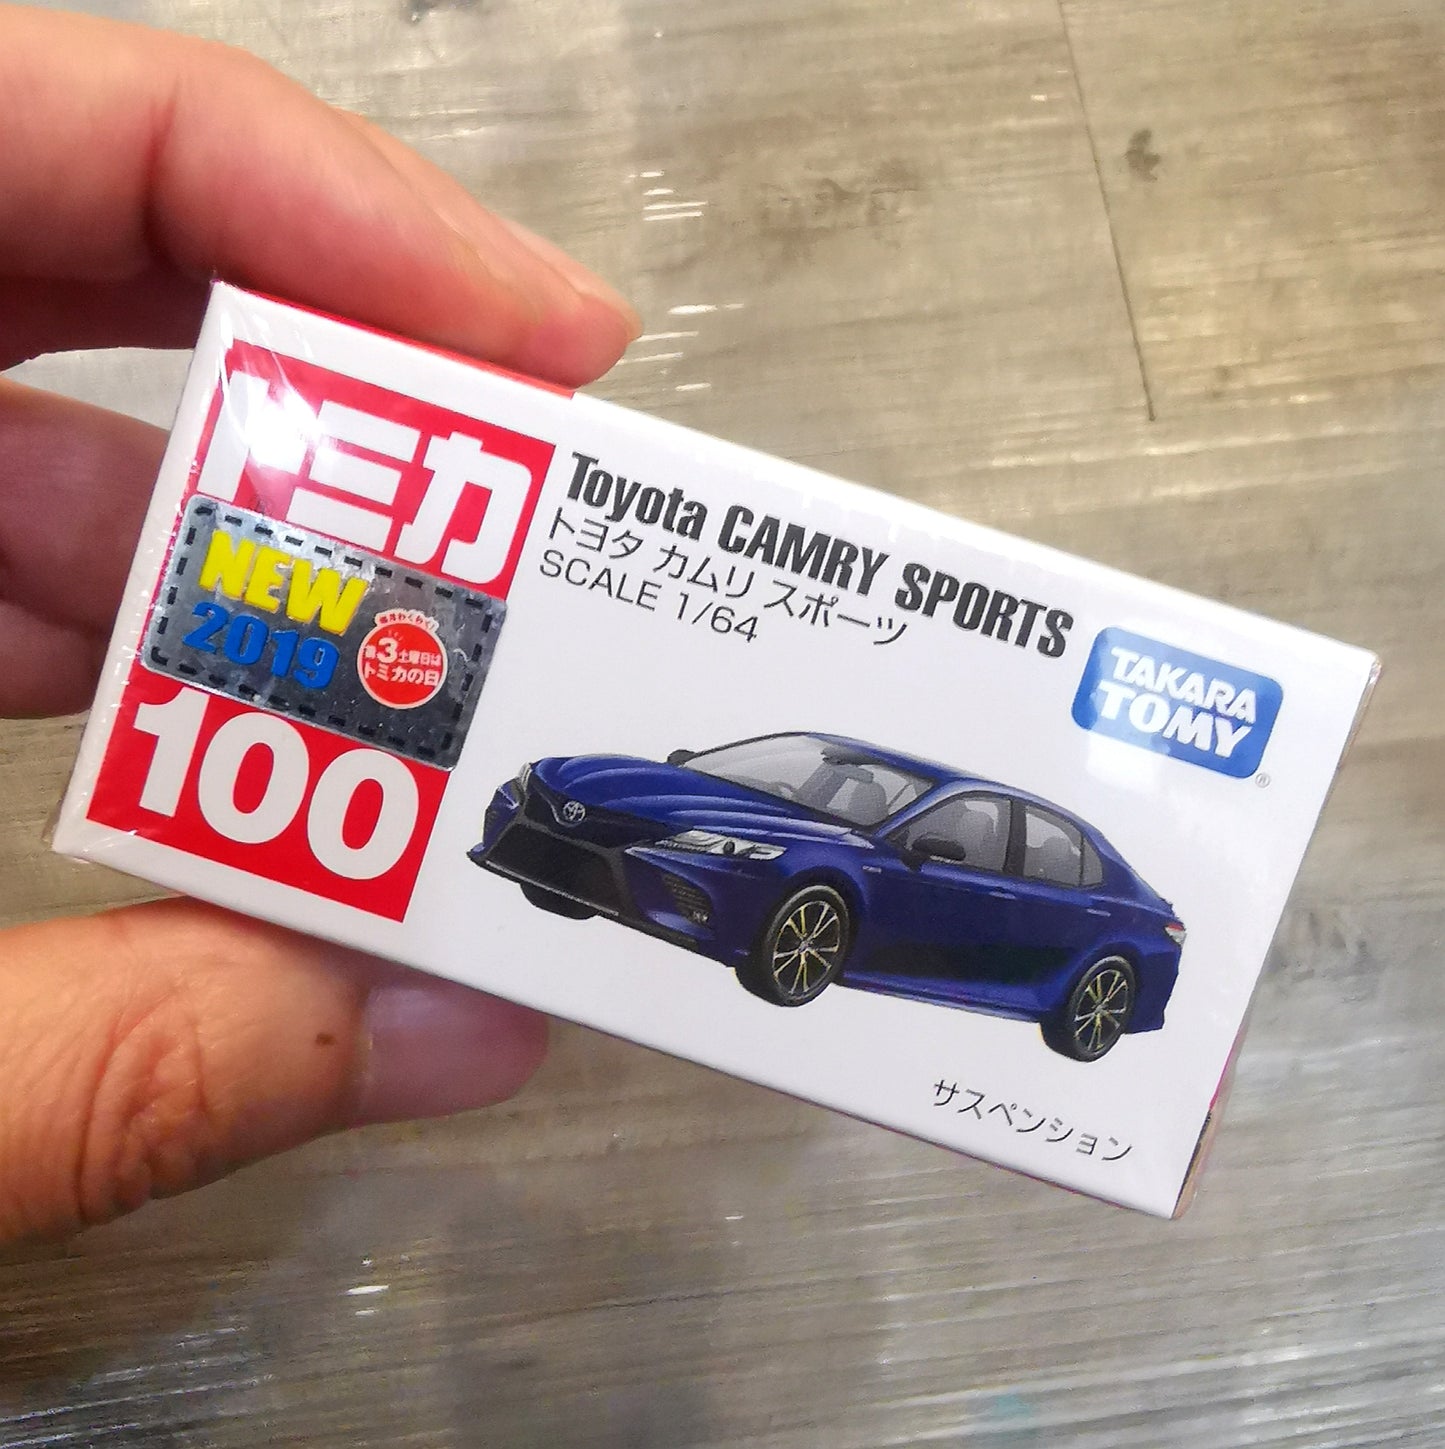 Tomica #100 Toyota Carmy Sports 1/64 SCALE